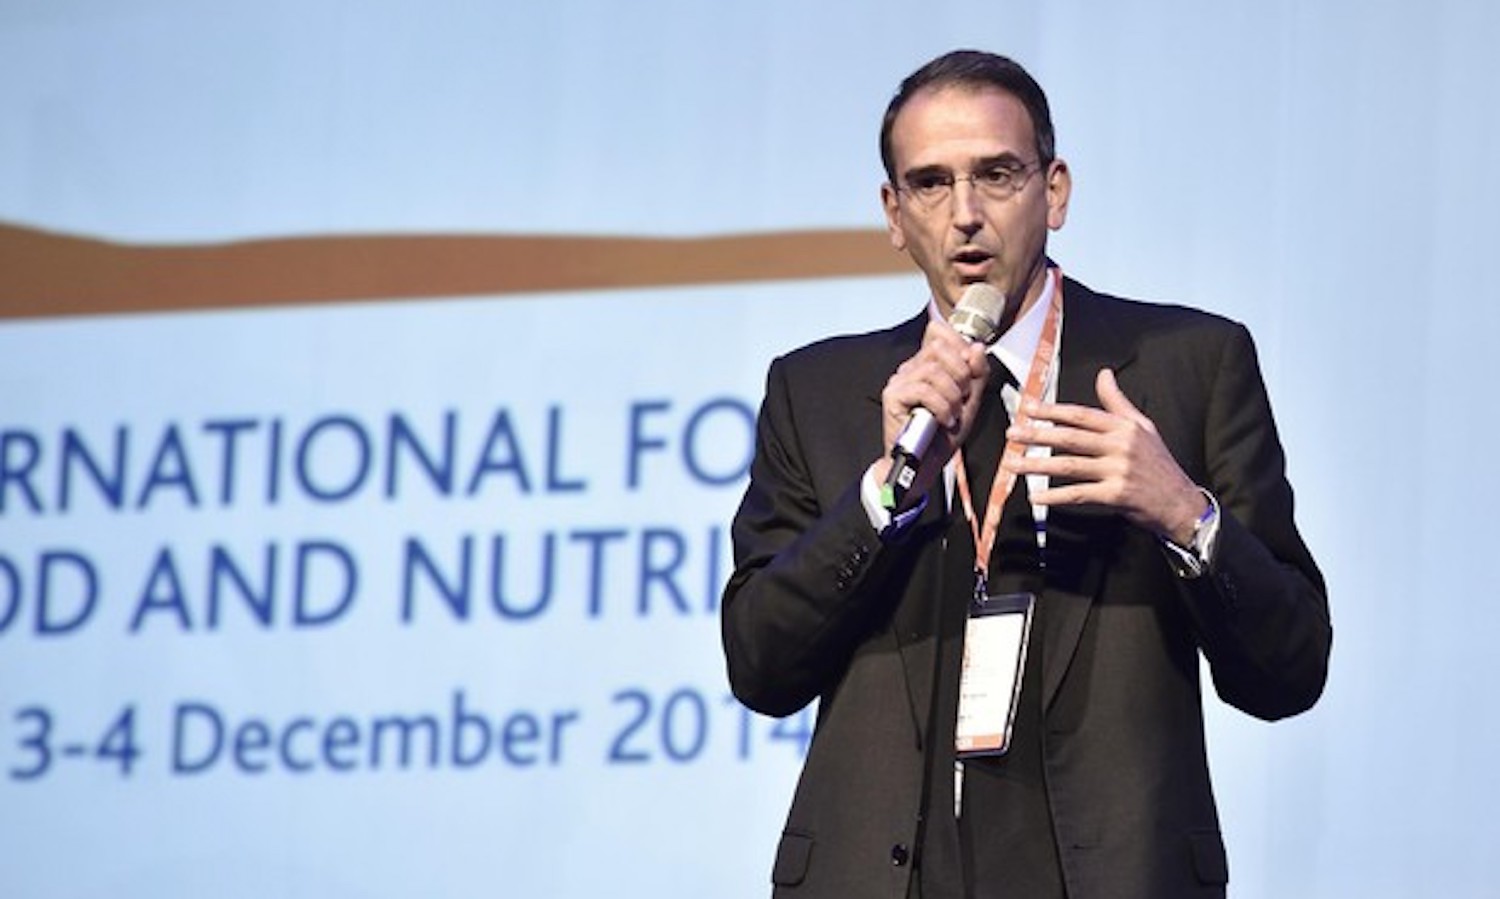 Food Tank honors Luca Virginio, Chief Communication and External Relations Officer at Barilla Group and the BCFN Foundation Vice Chairman.